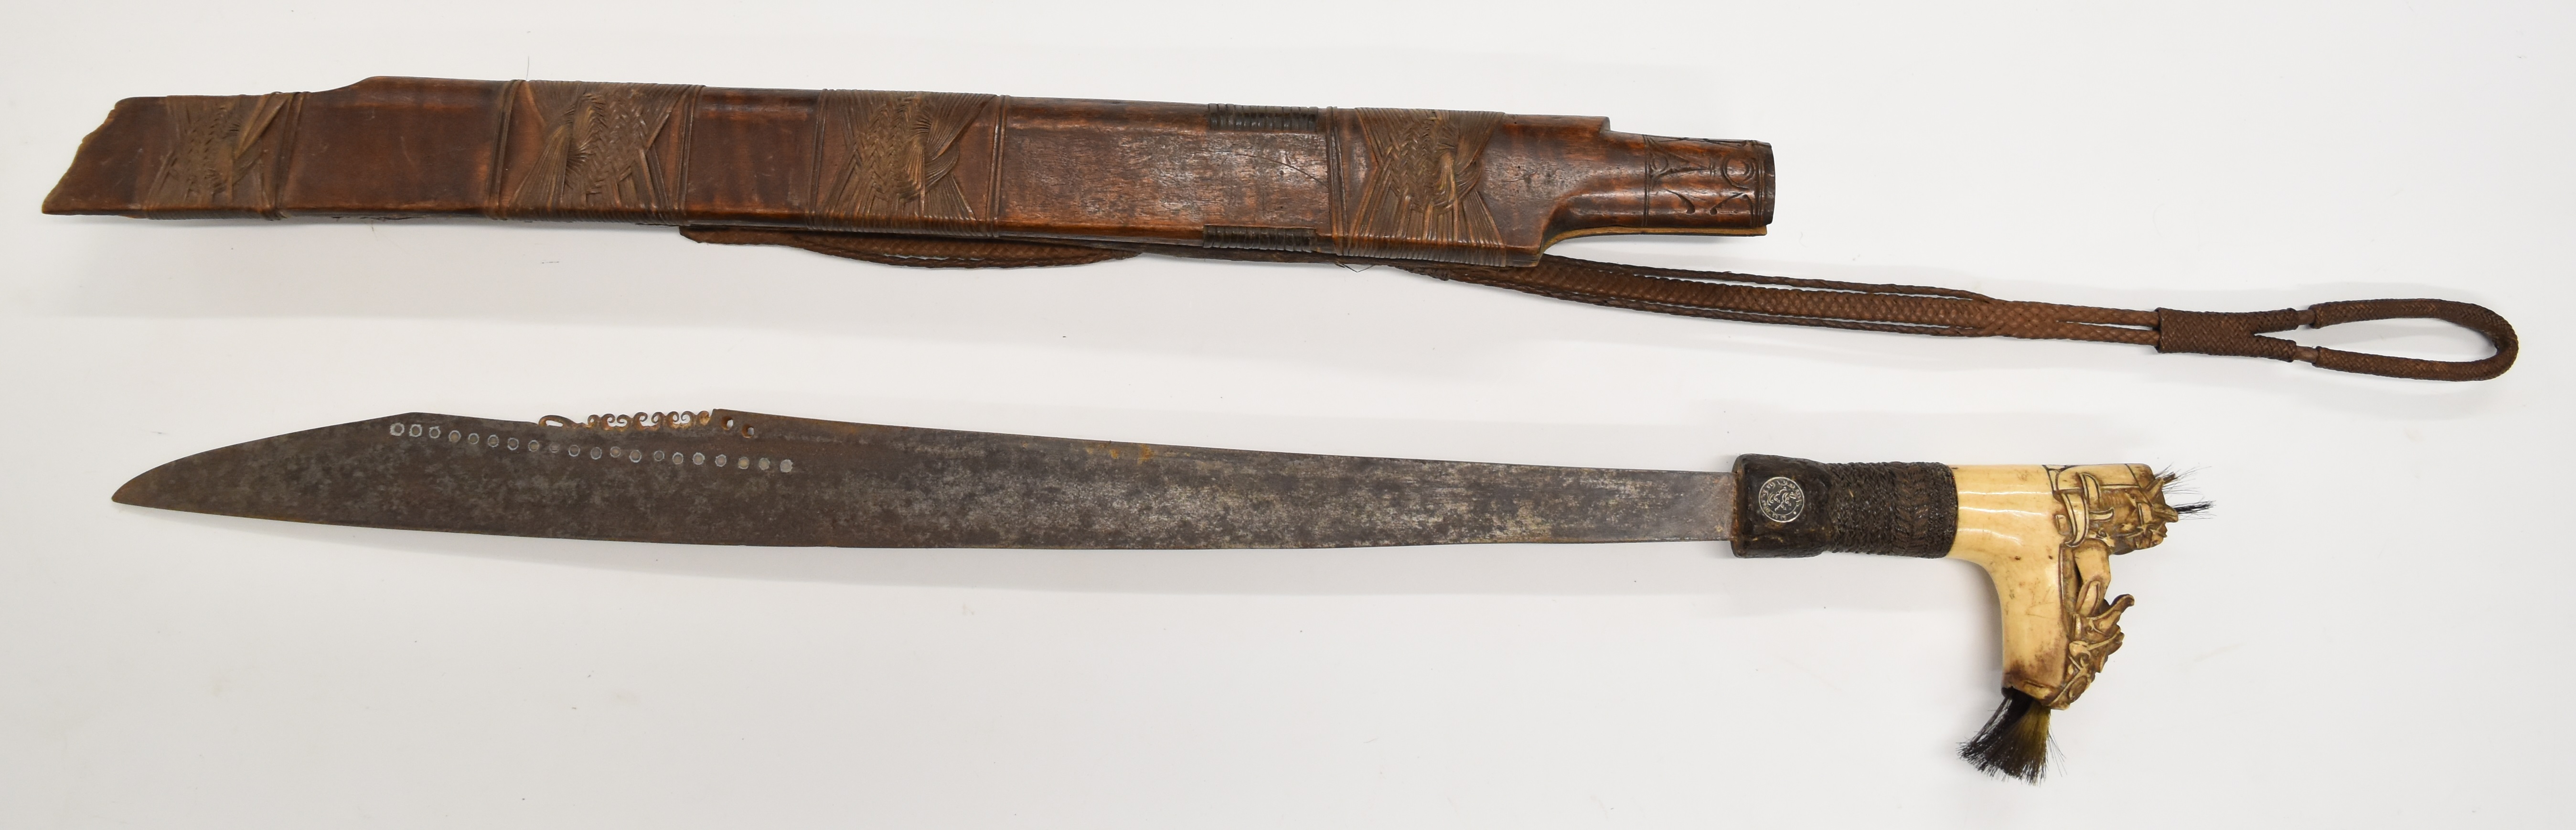 Borneo Dayak headhunter's sword with heavily carved bone hilt, hair plumes, coin inset grip,